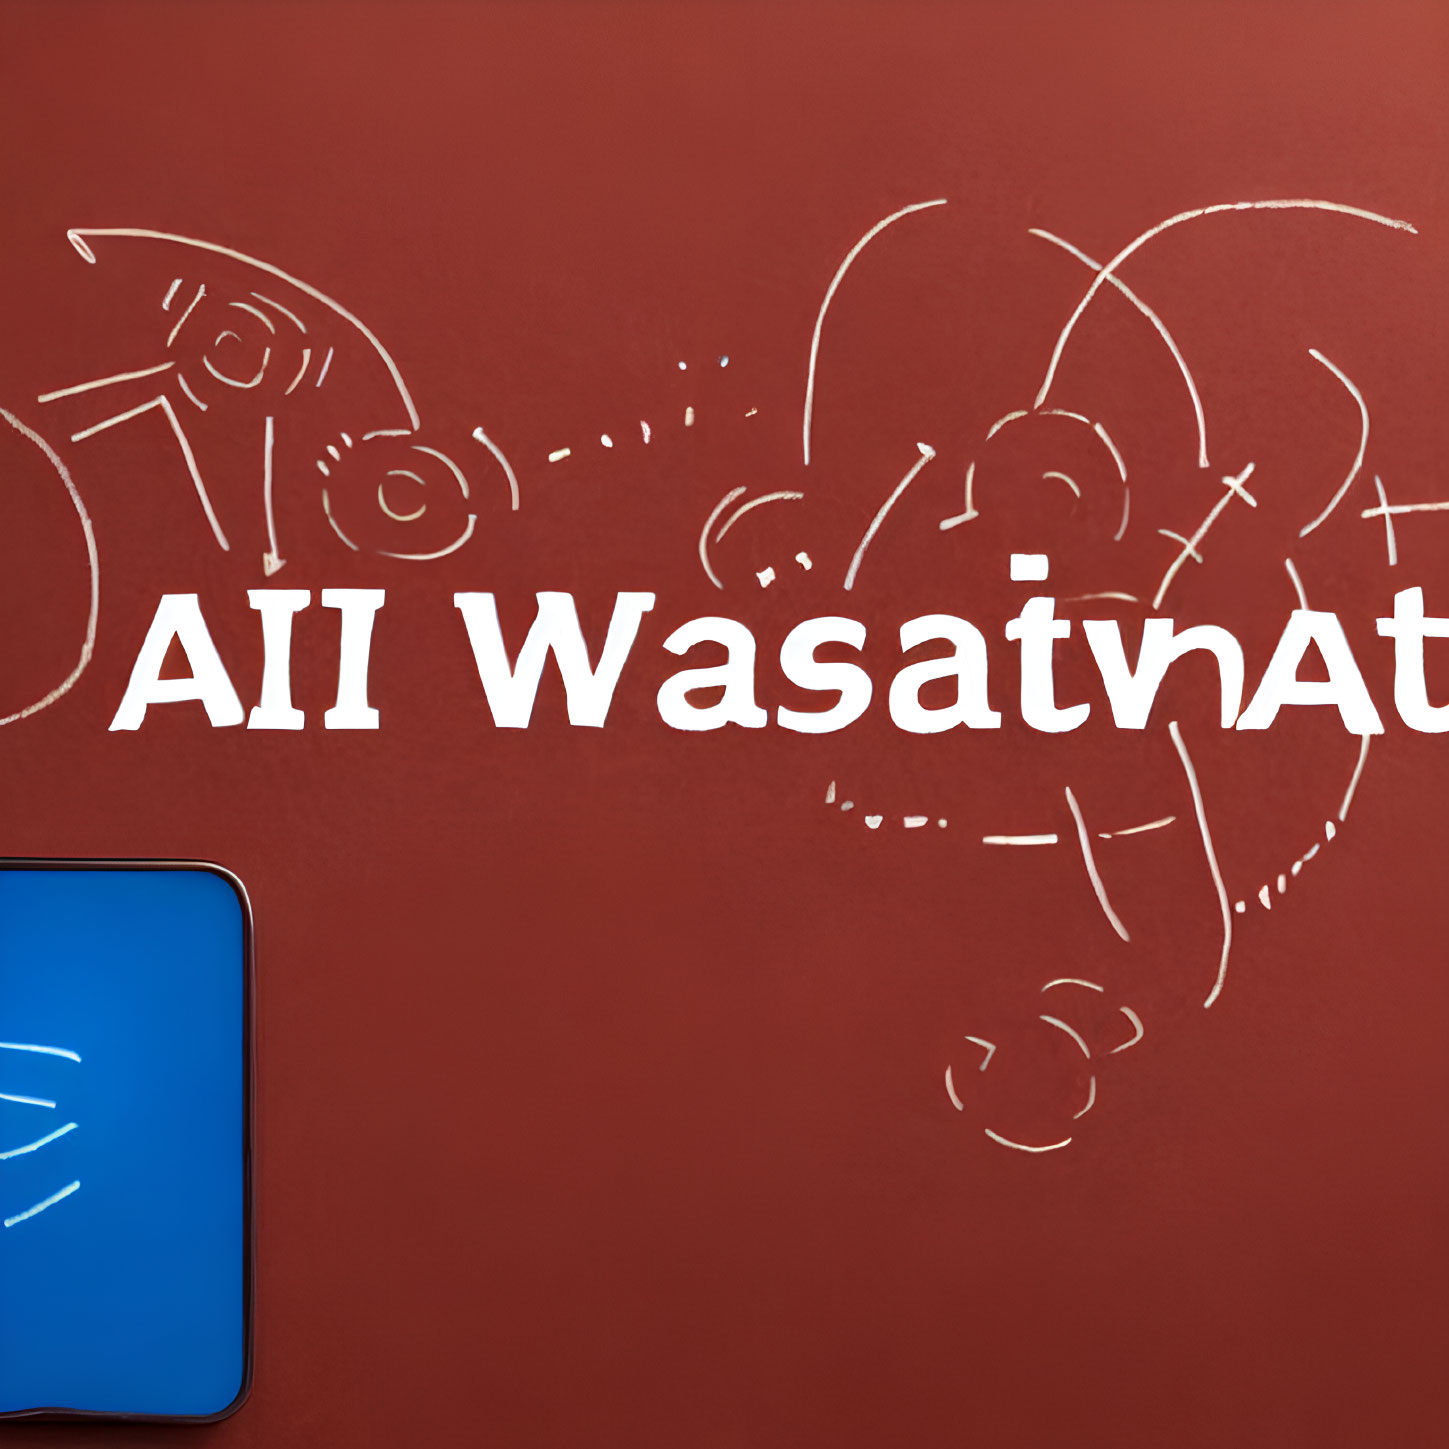 Red Arabic Calligraphy on White Background with Blue Handprint Icon